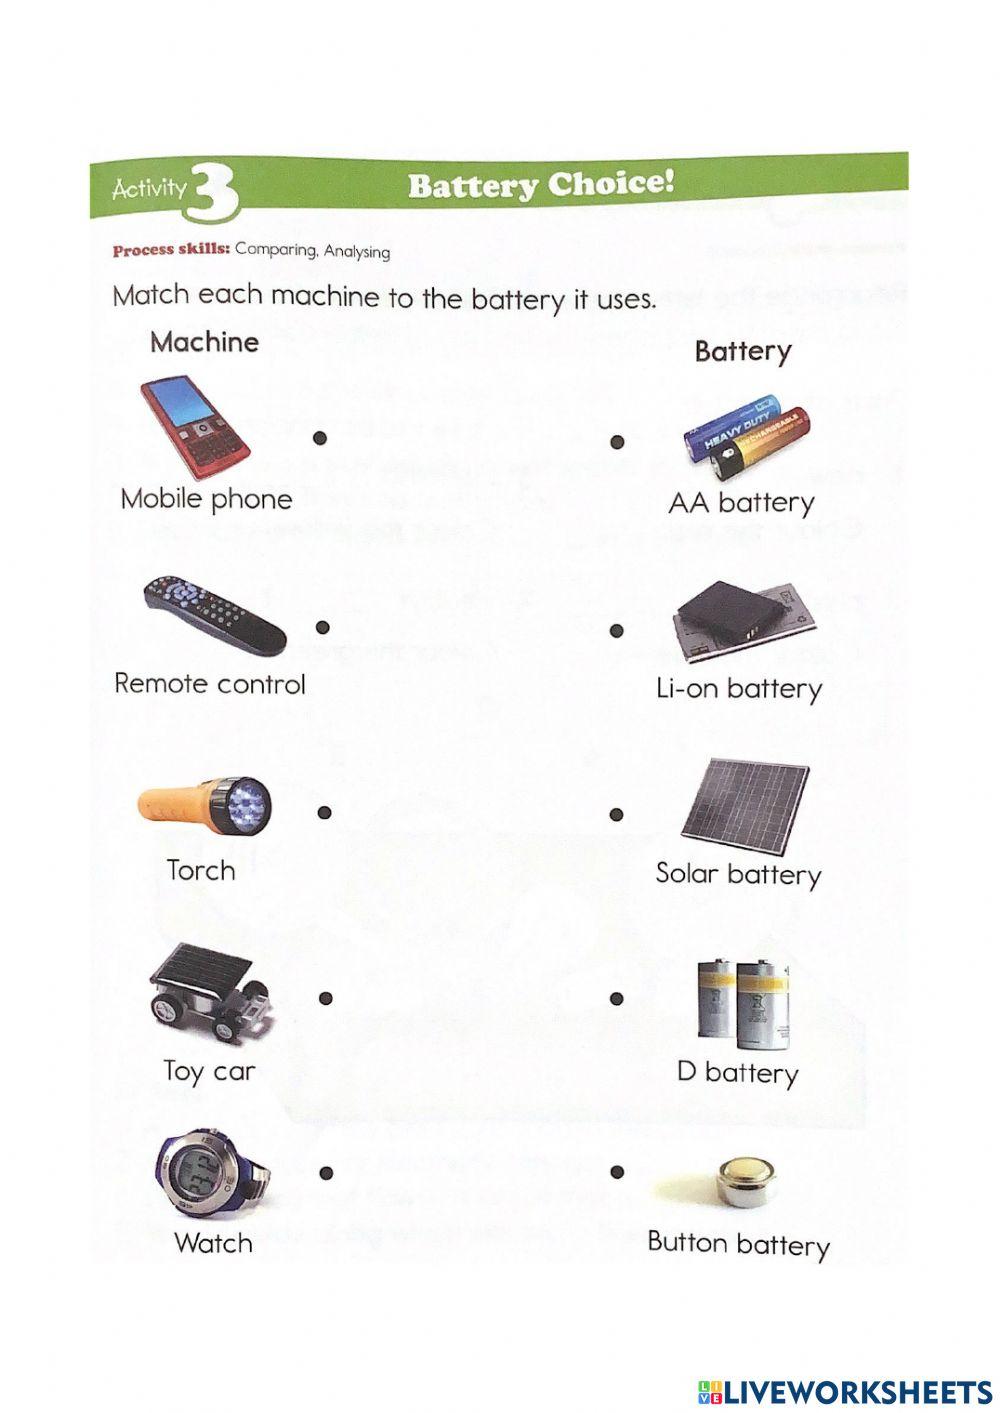 Review electrical appliances